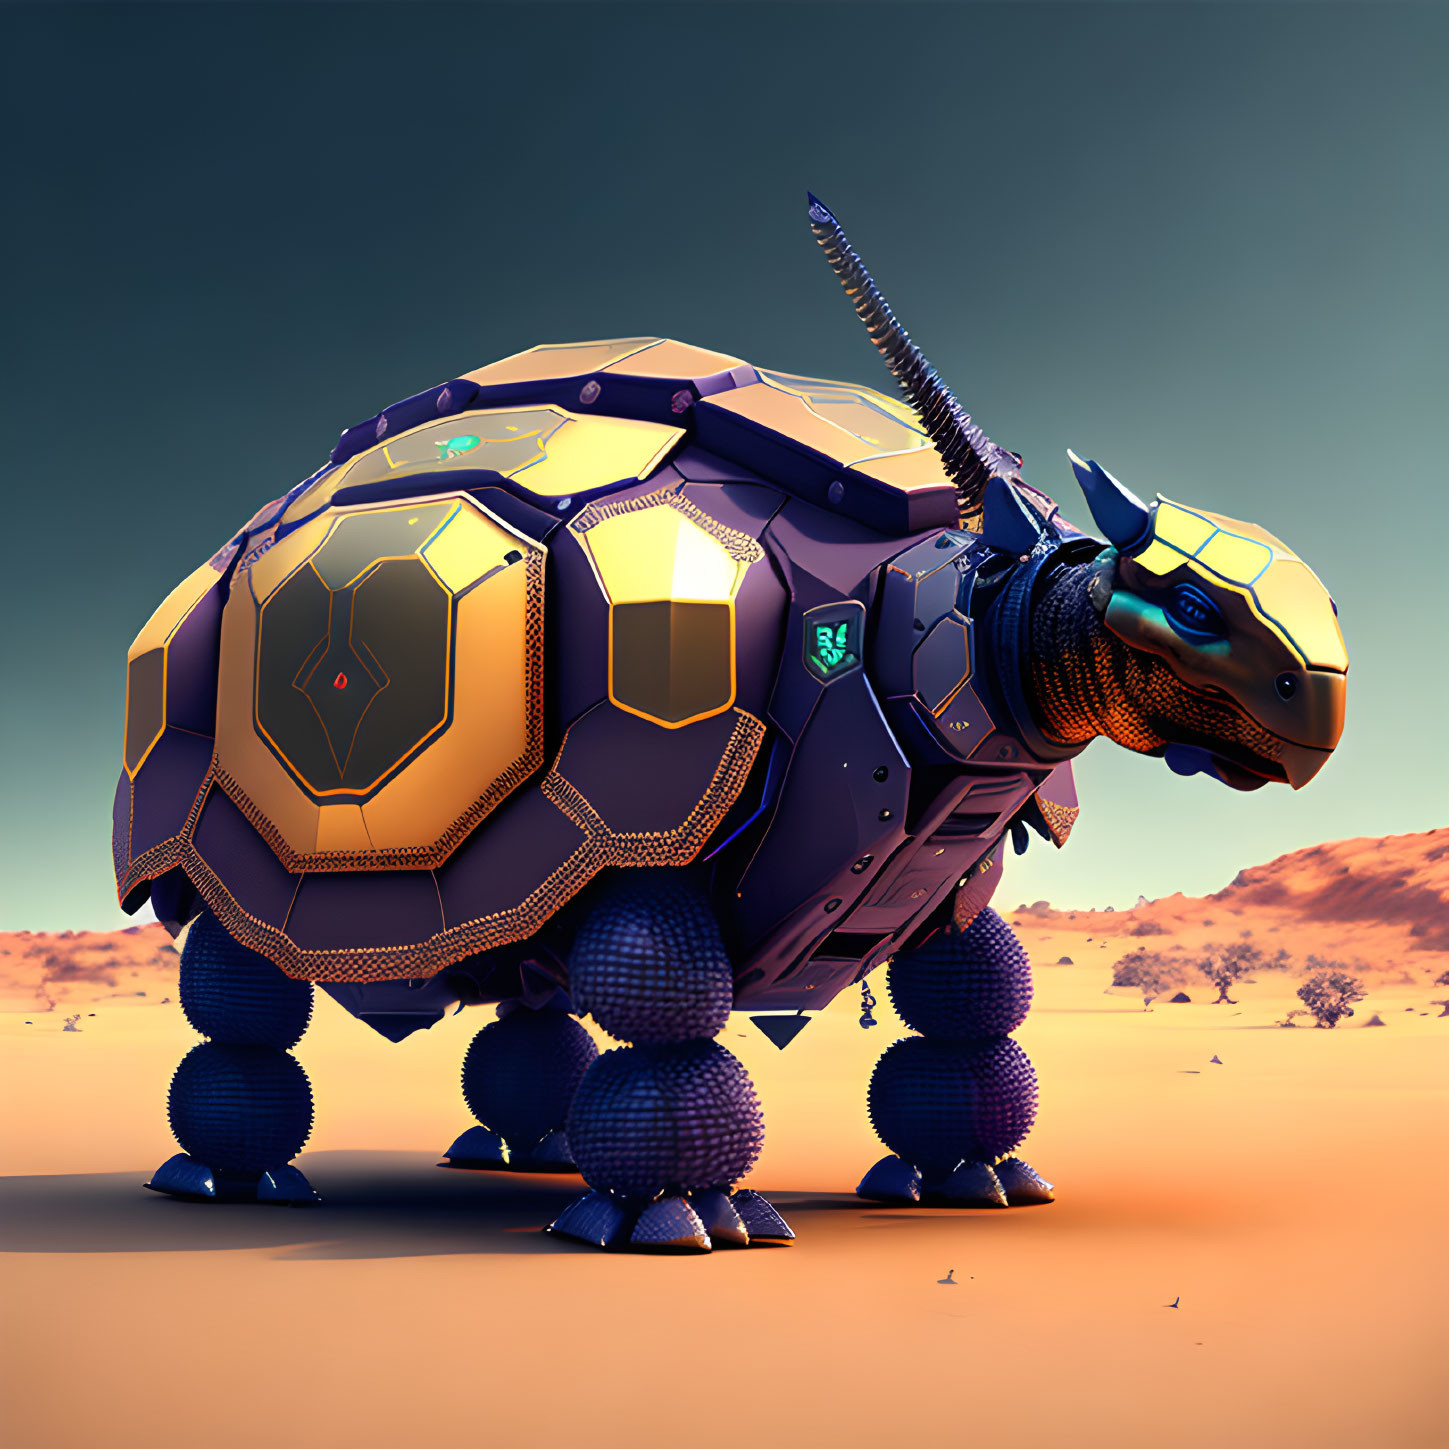 Mechanized tortoise with blue and gold armor in desert landscape